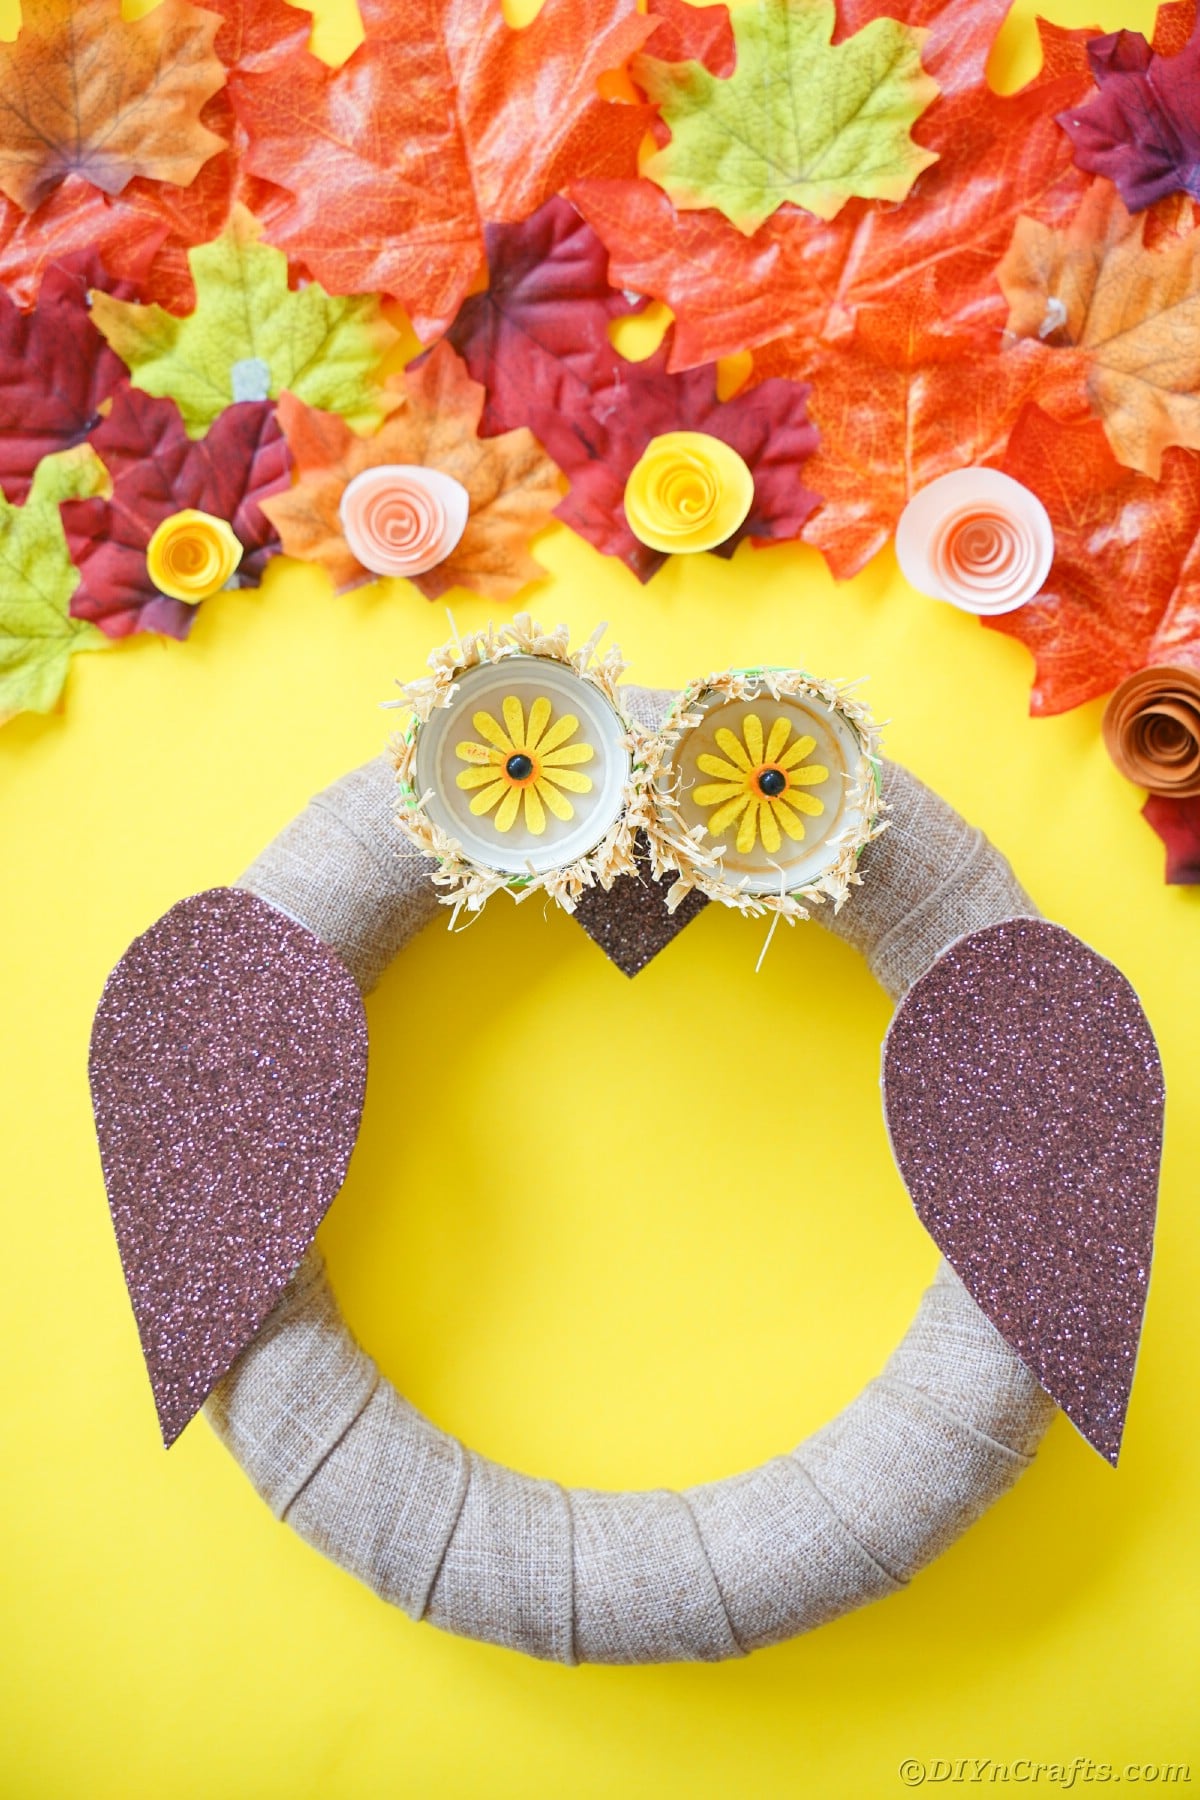 Yellow background behind owl wreath